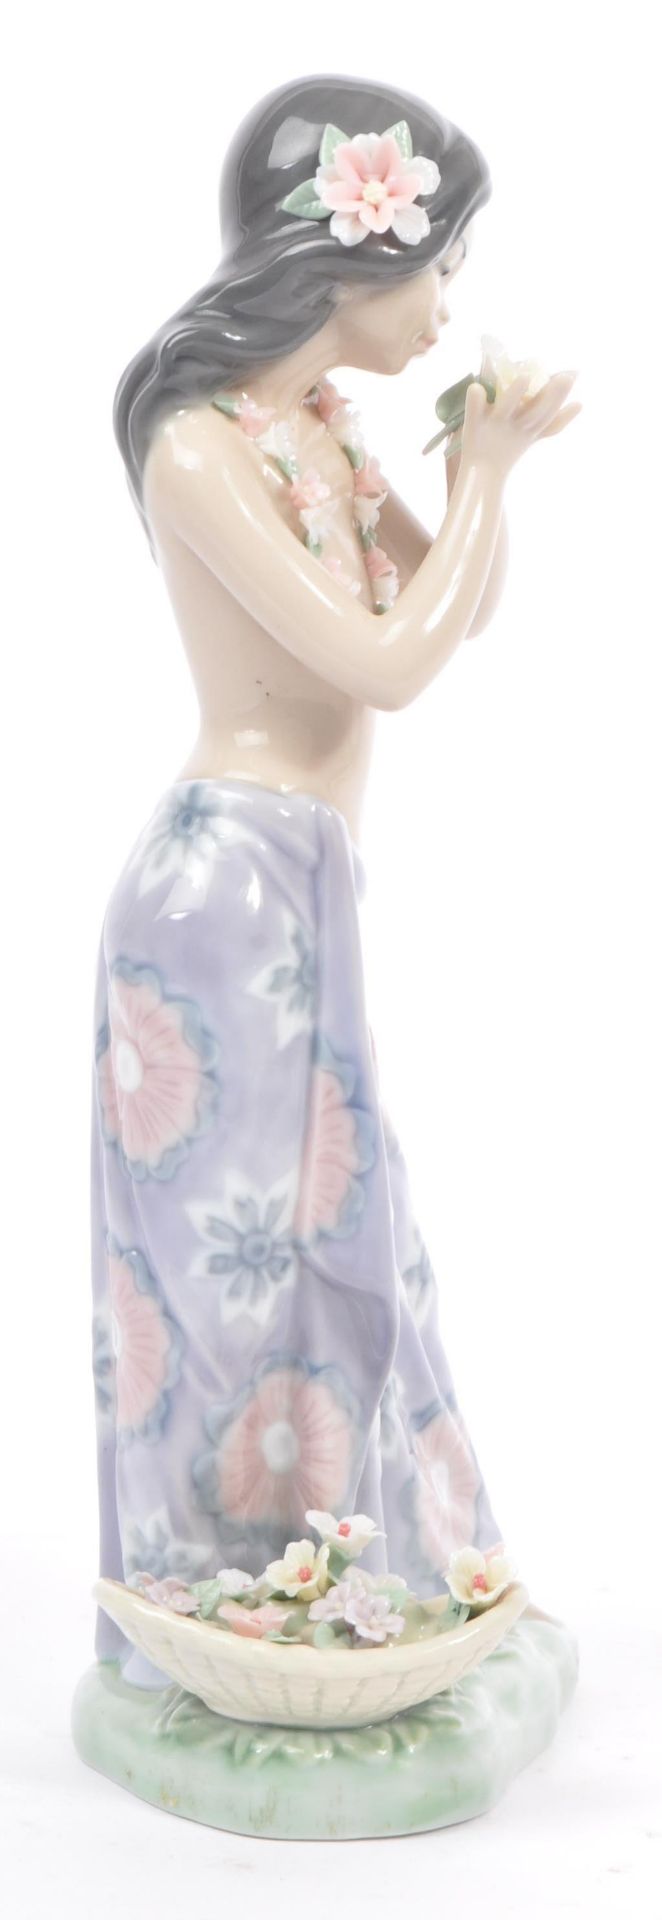 LLADRO - AROMA OF THE ISLAND - 20TH CENTURY PORCELAIN FIGURE - Image 2 of 9